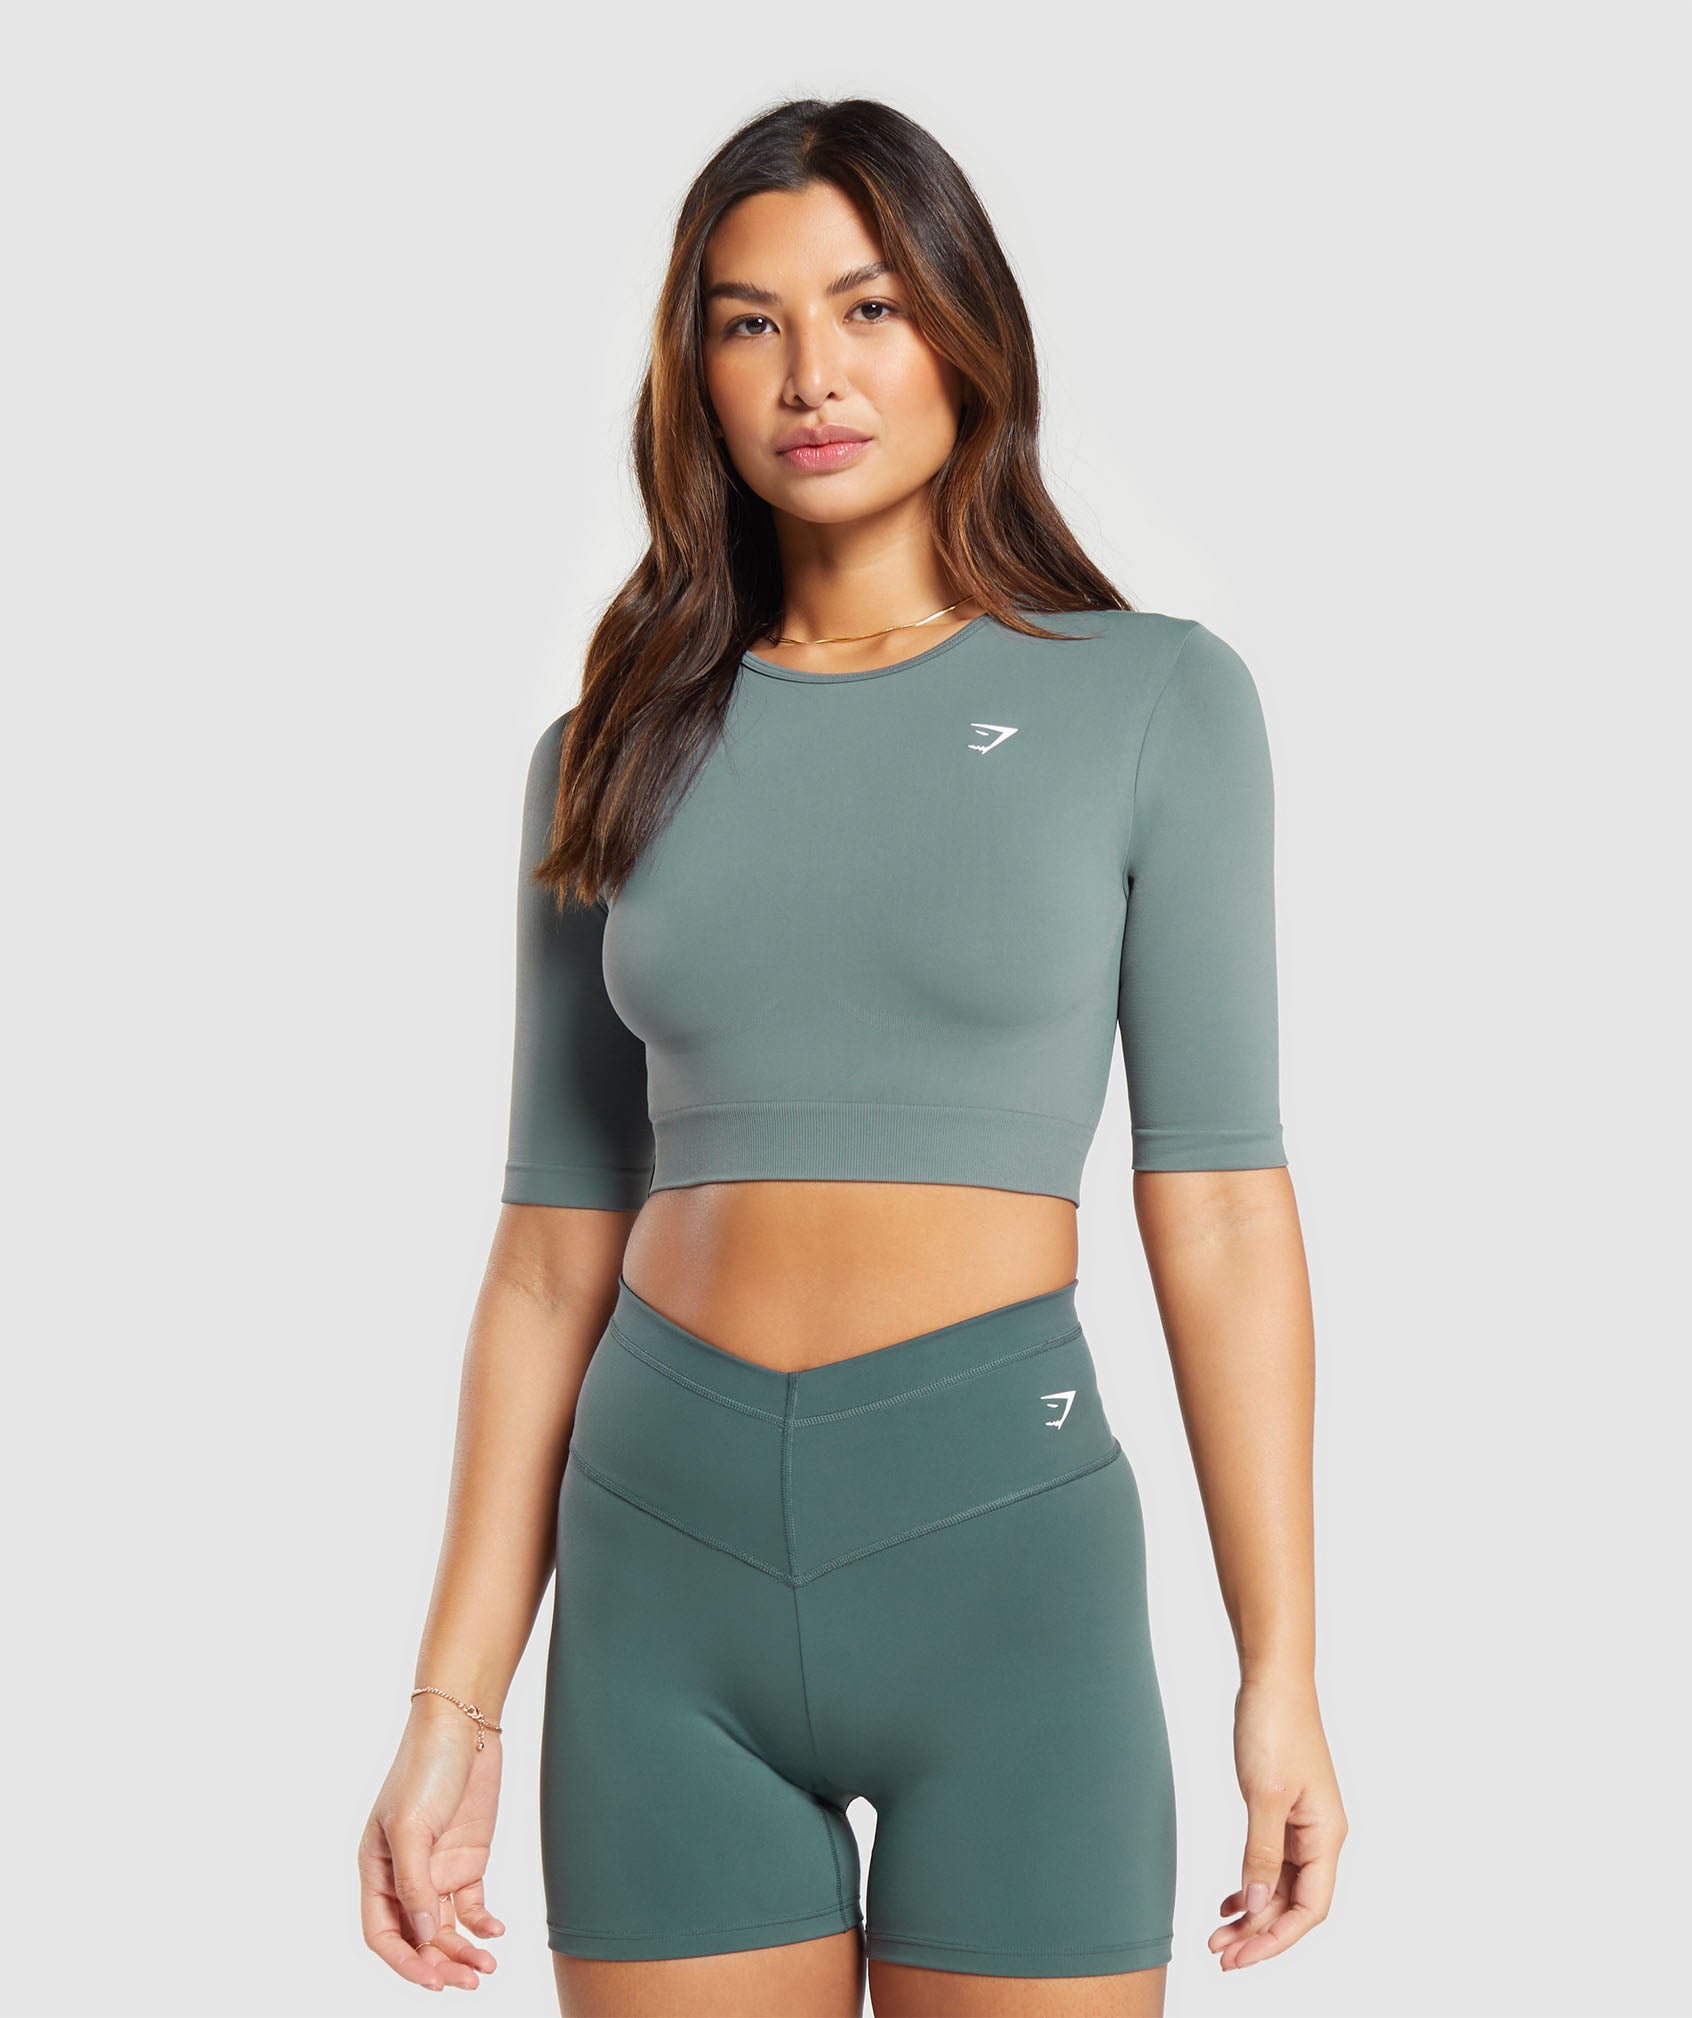 Everyday Seamless Crop Top in Cargo Teal